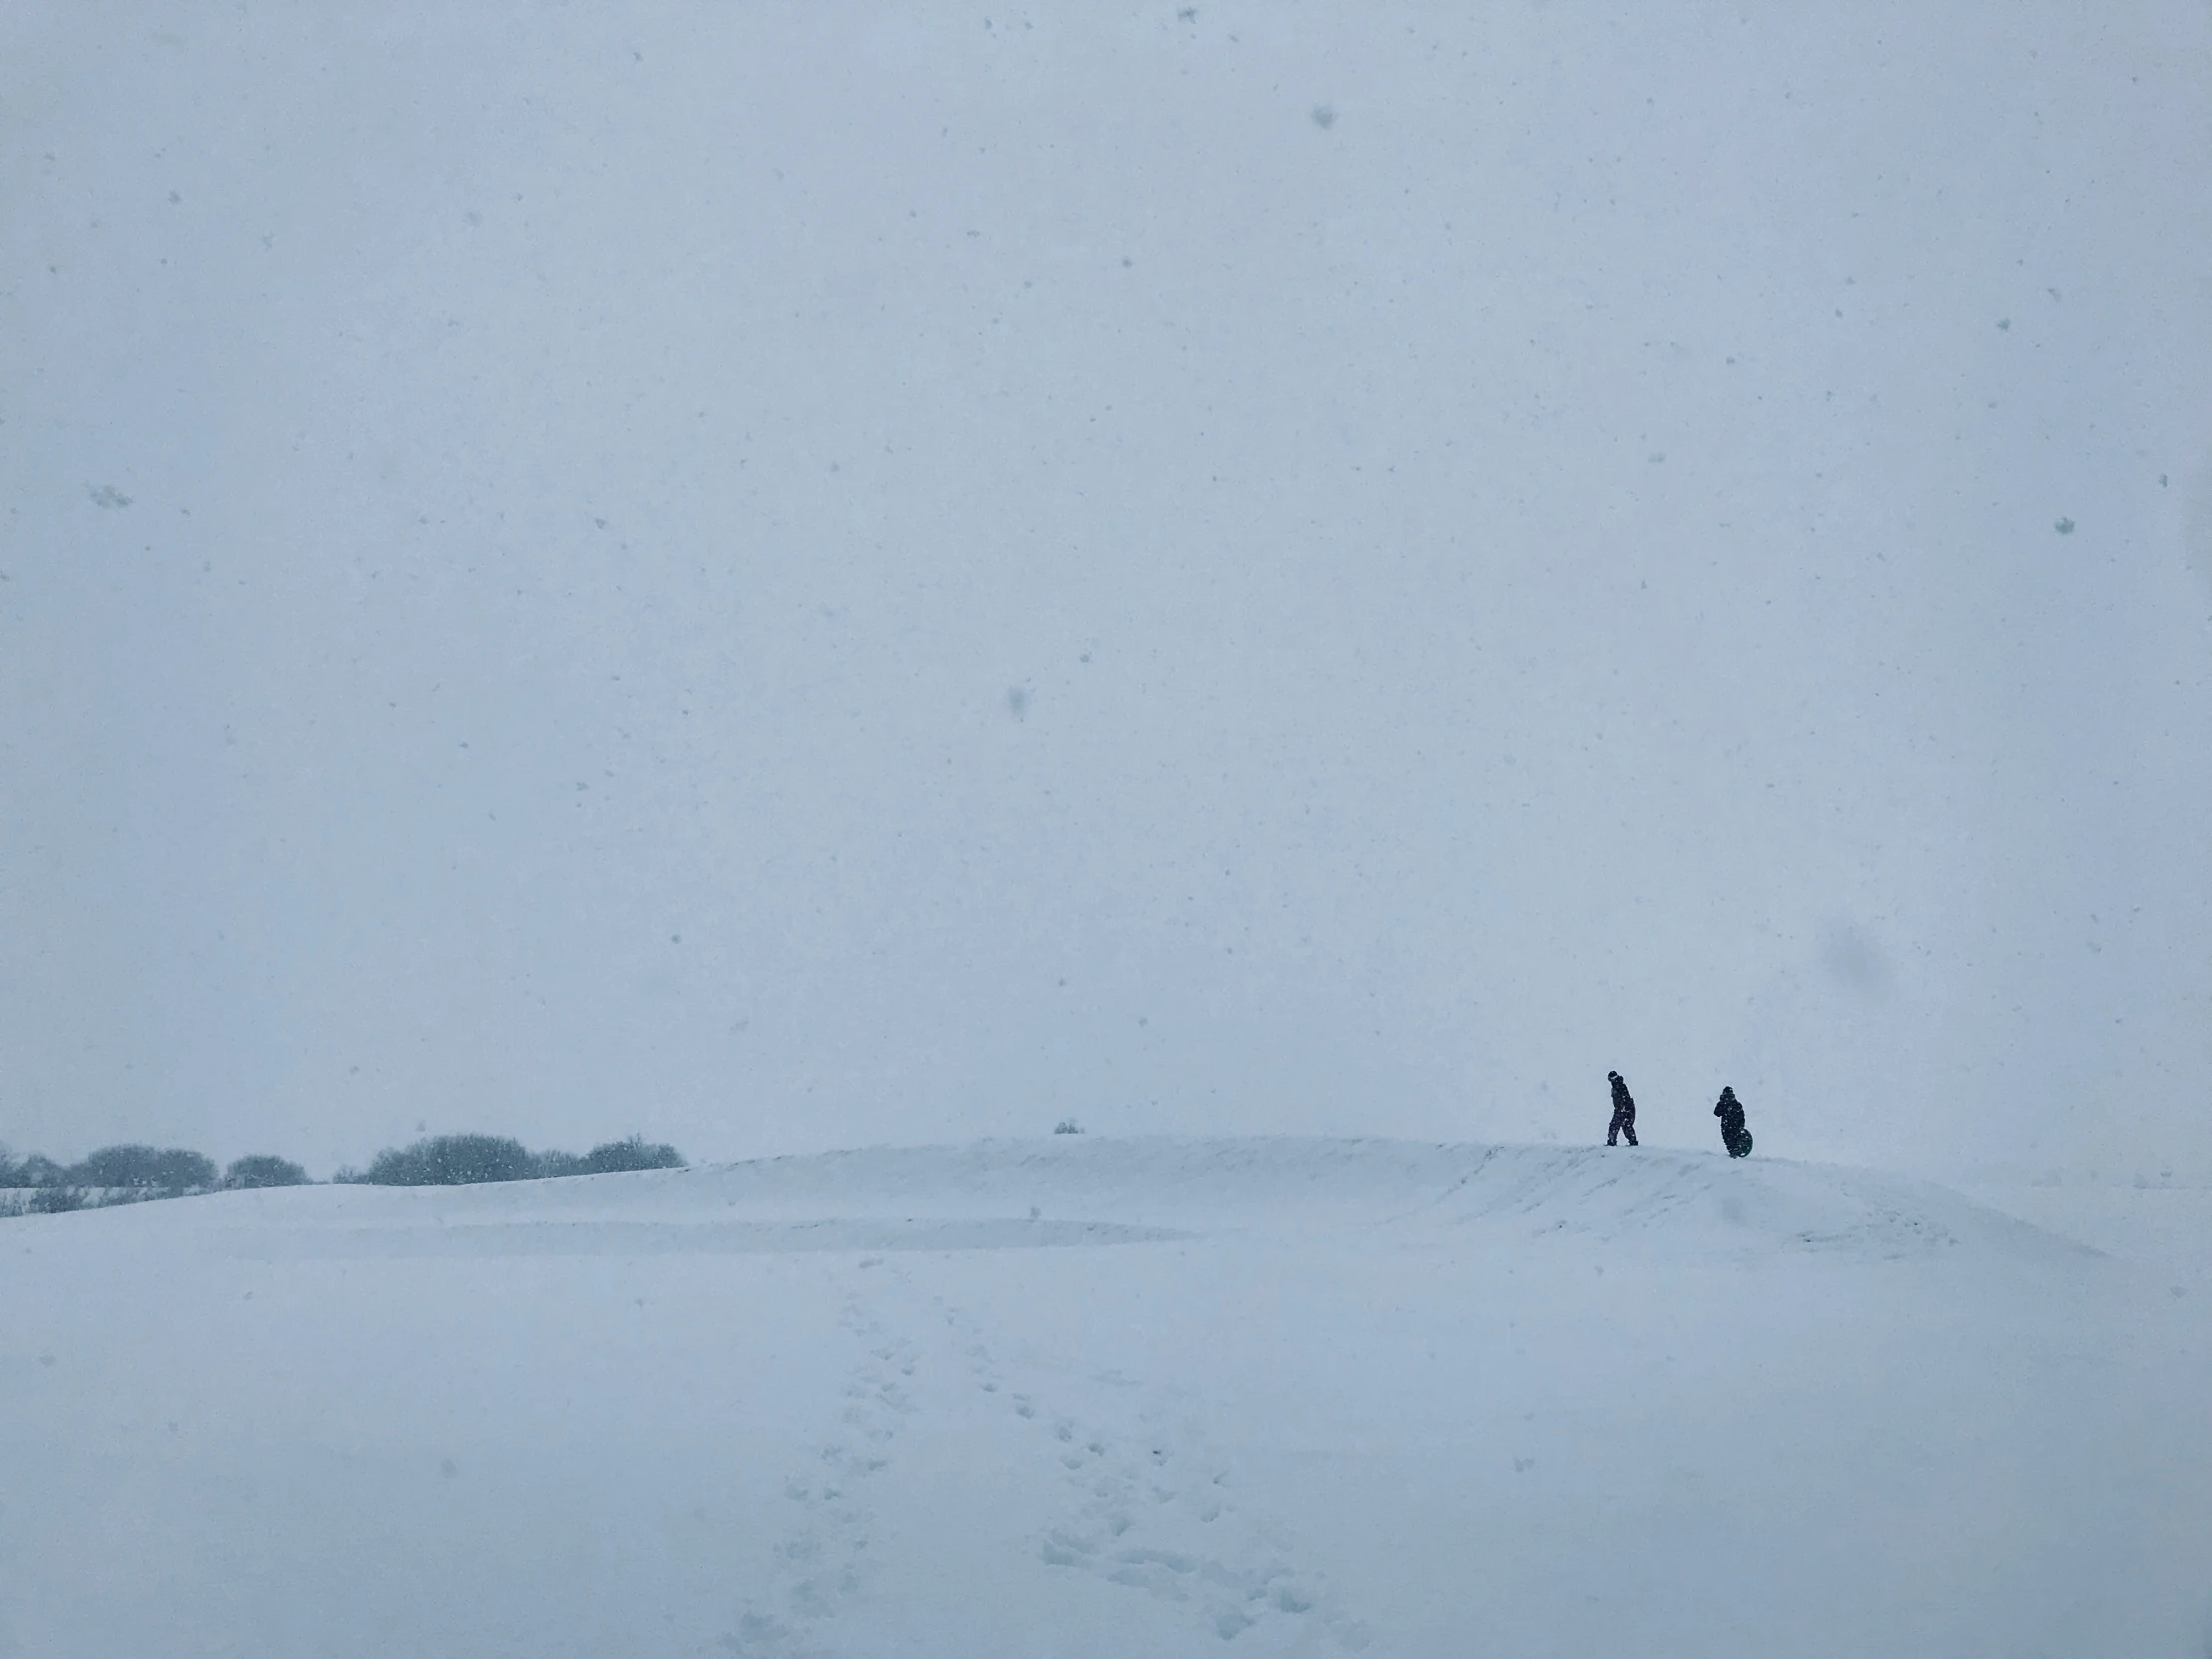 two people are standing on a large snowy hill